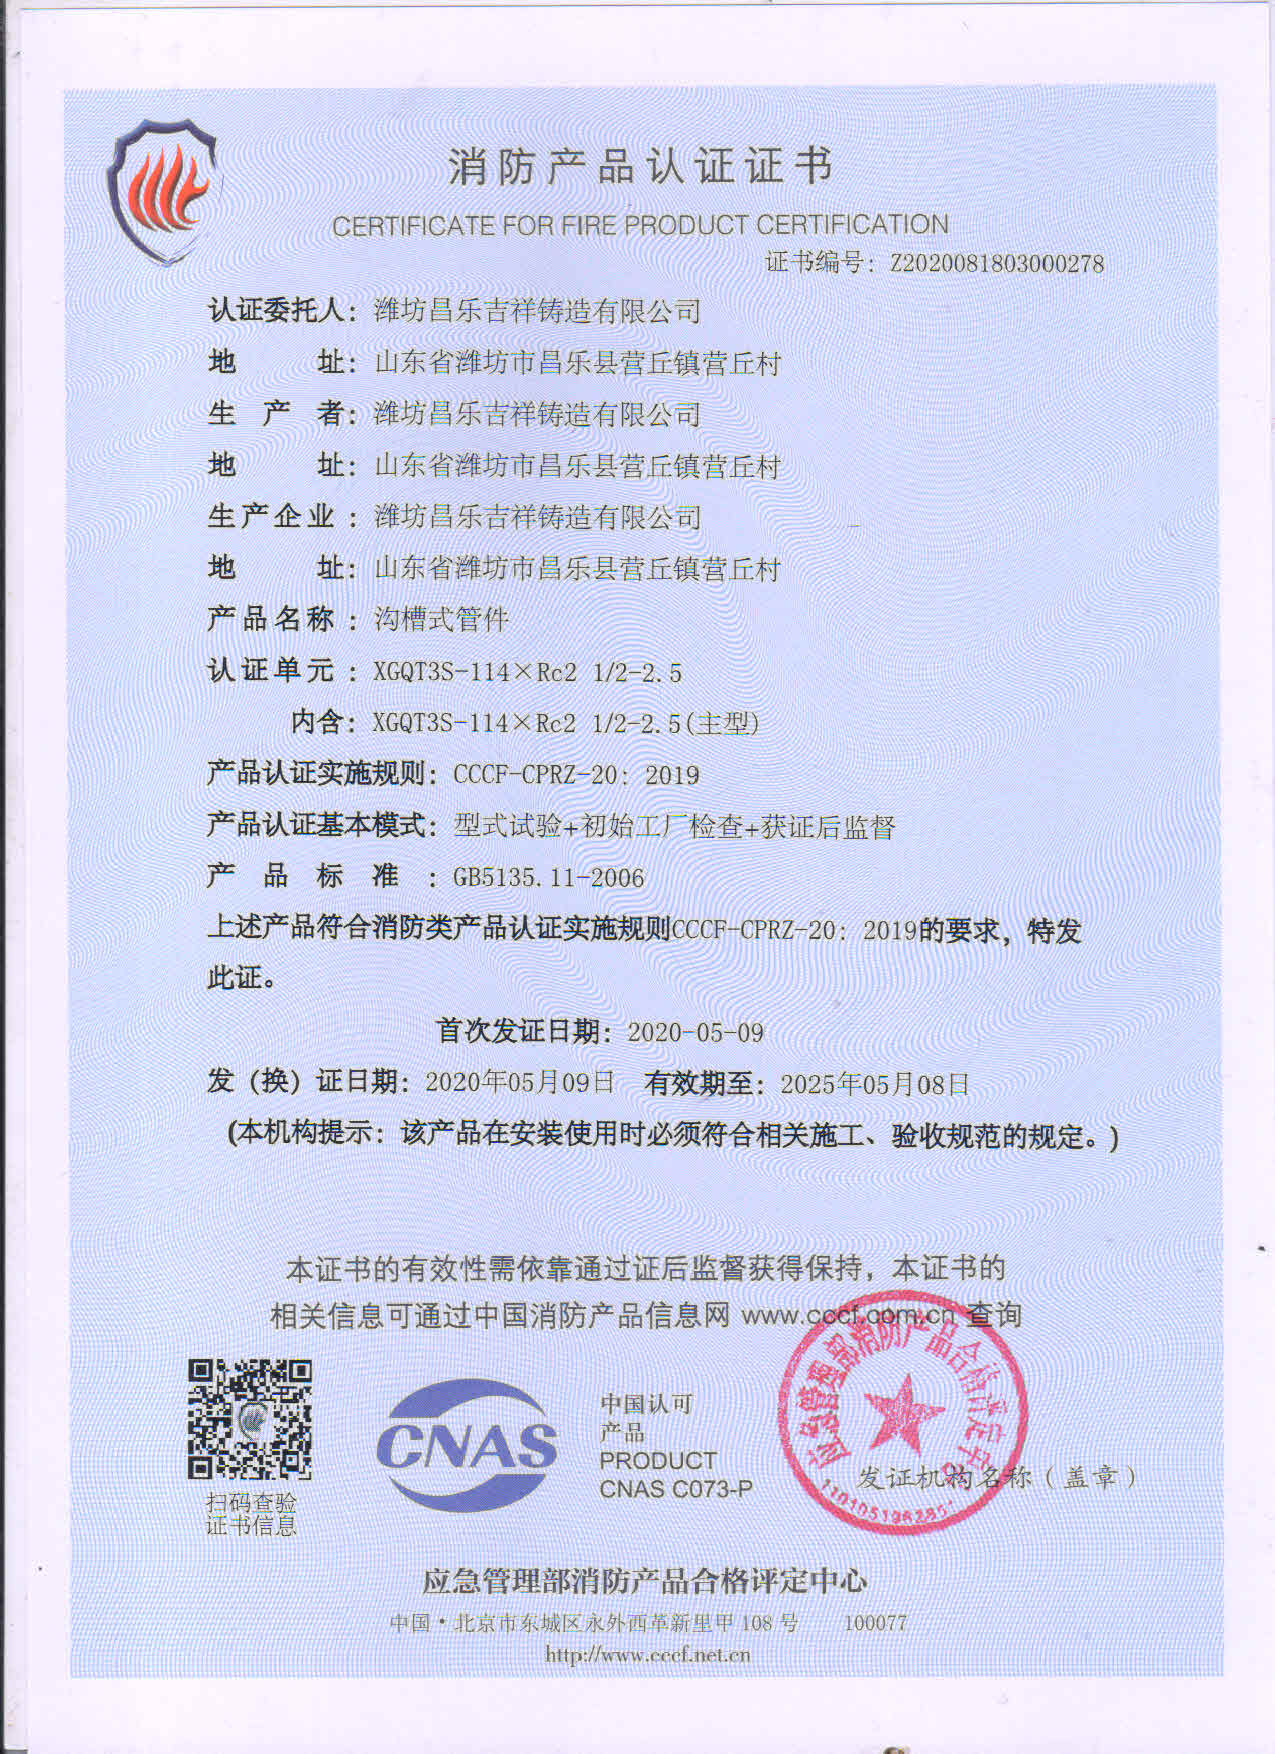 Certificate for the Fire Product Certification  